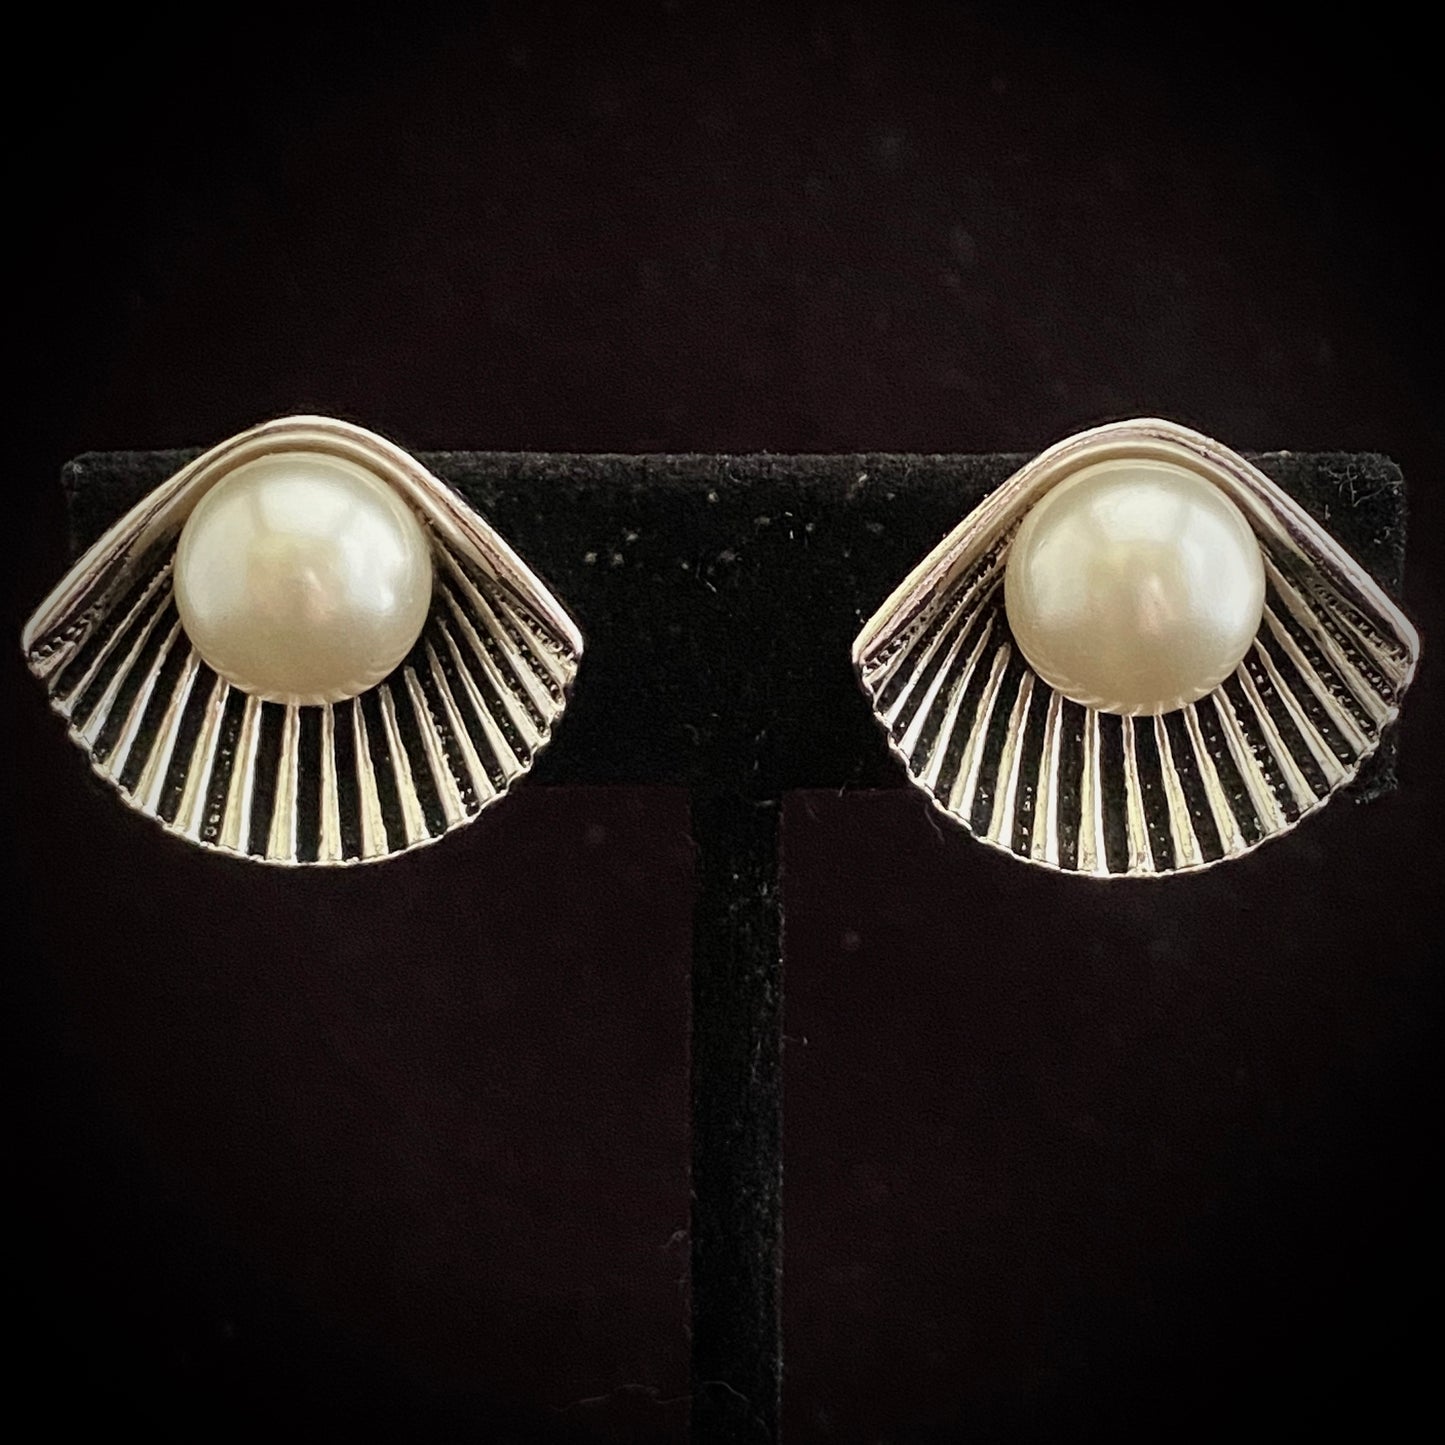 1956 Sarah Coventry Pearl Of The Sea Earrings